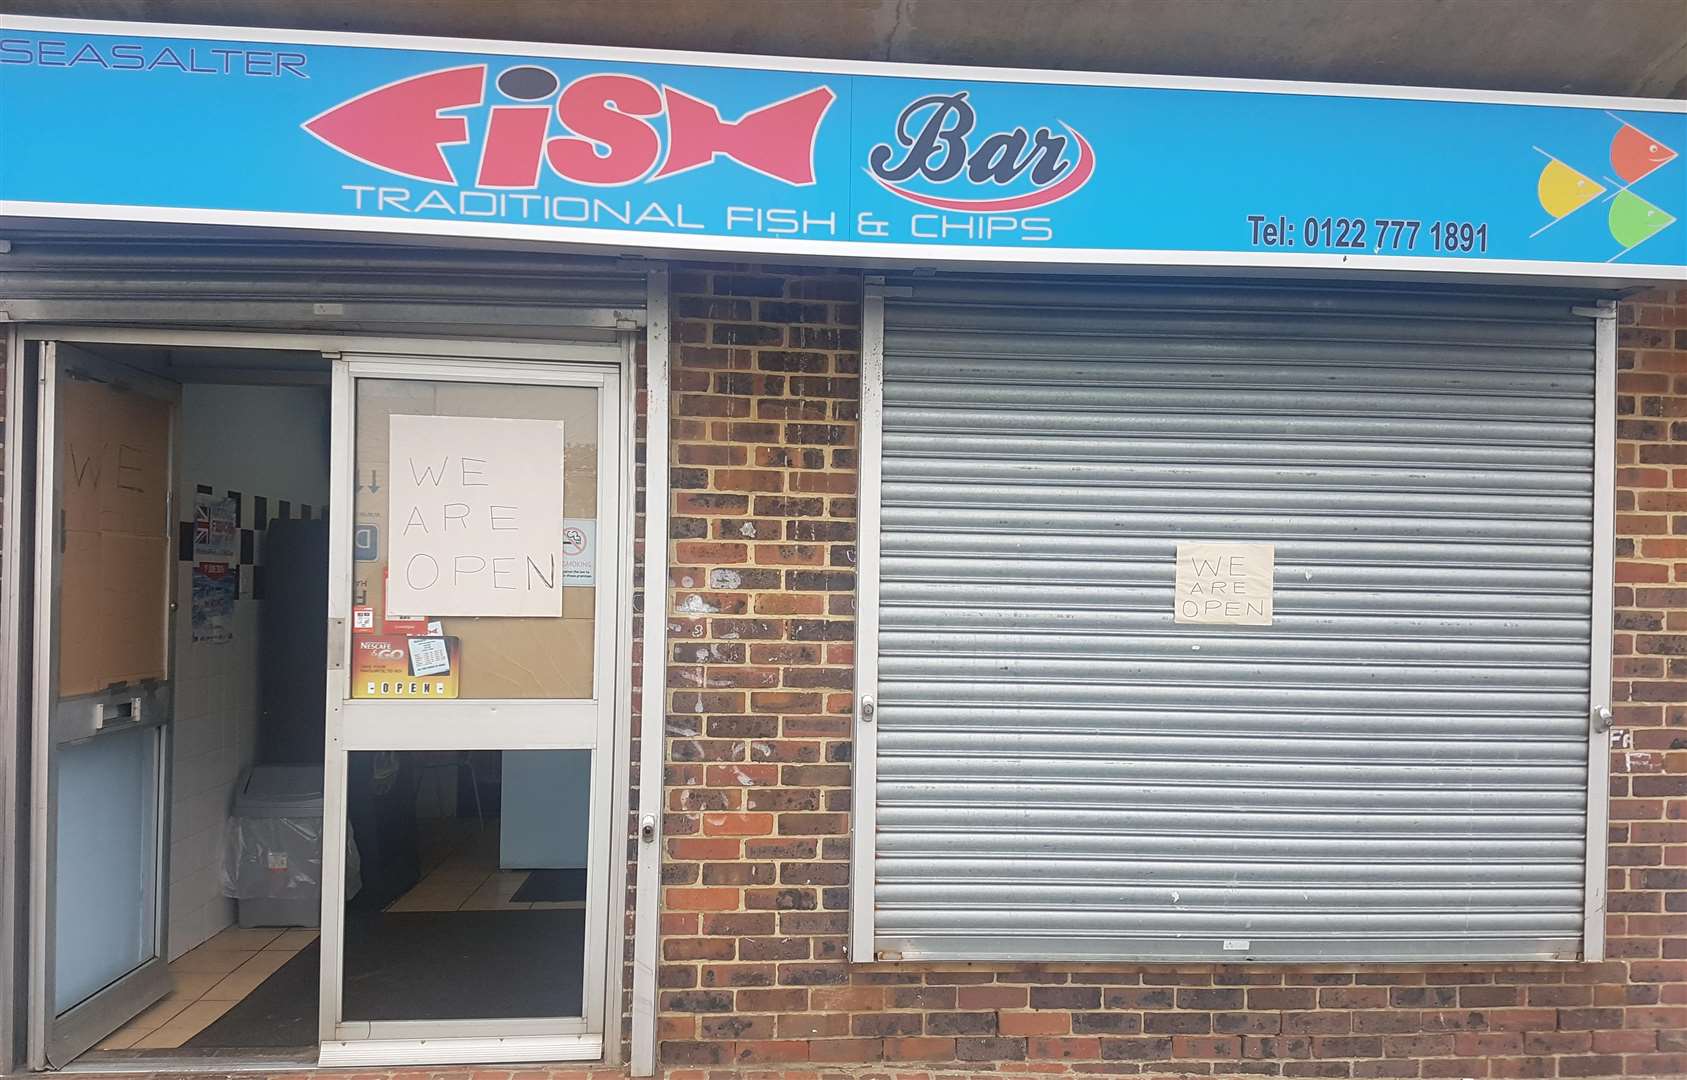 The shop front was smashed through (2282496)